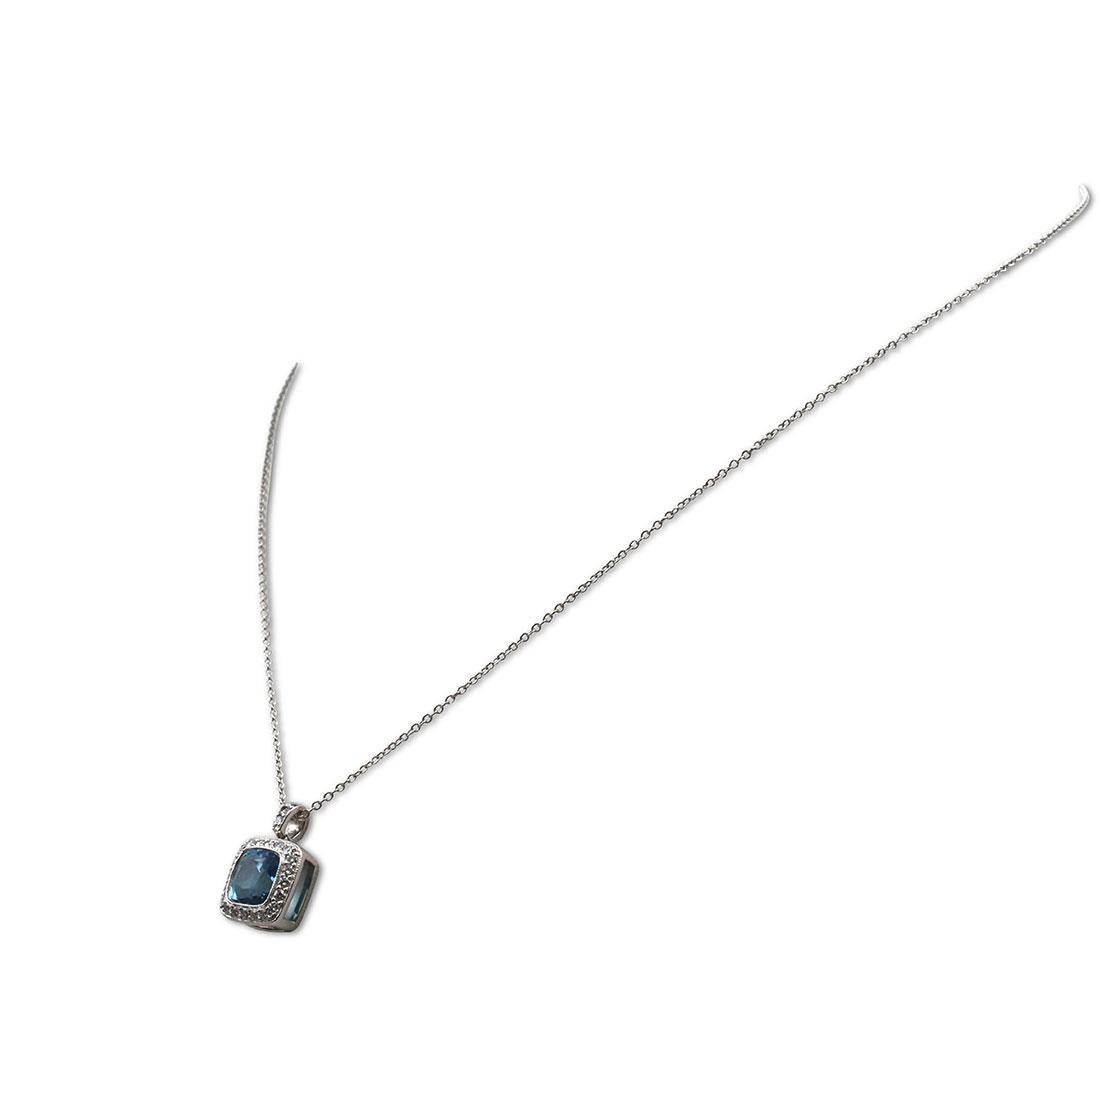 Authentic Tiffany & Co. 'Legacy' pendant necklace crafted in platinum centering on a cushion-cut aquamarine stone weighing an estimated 2.00 carats. The vibrant aquamarine stone is surrounded by high-quality round brilliant cut diamonds (E-F, VS